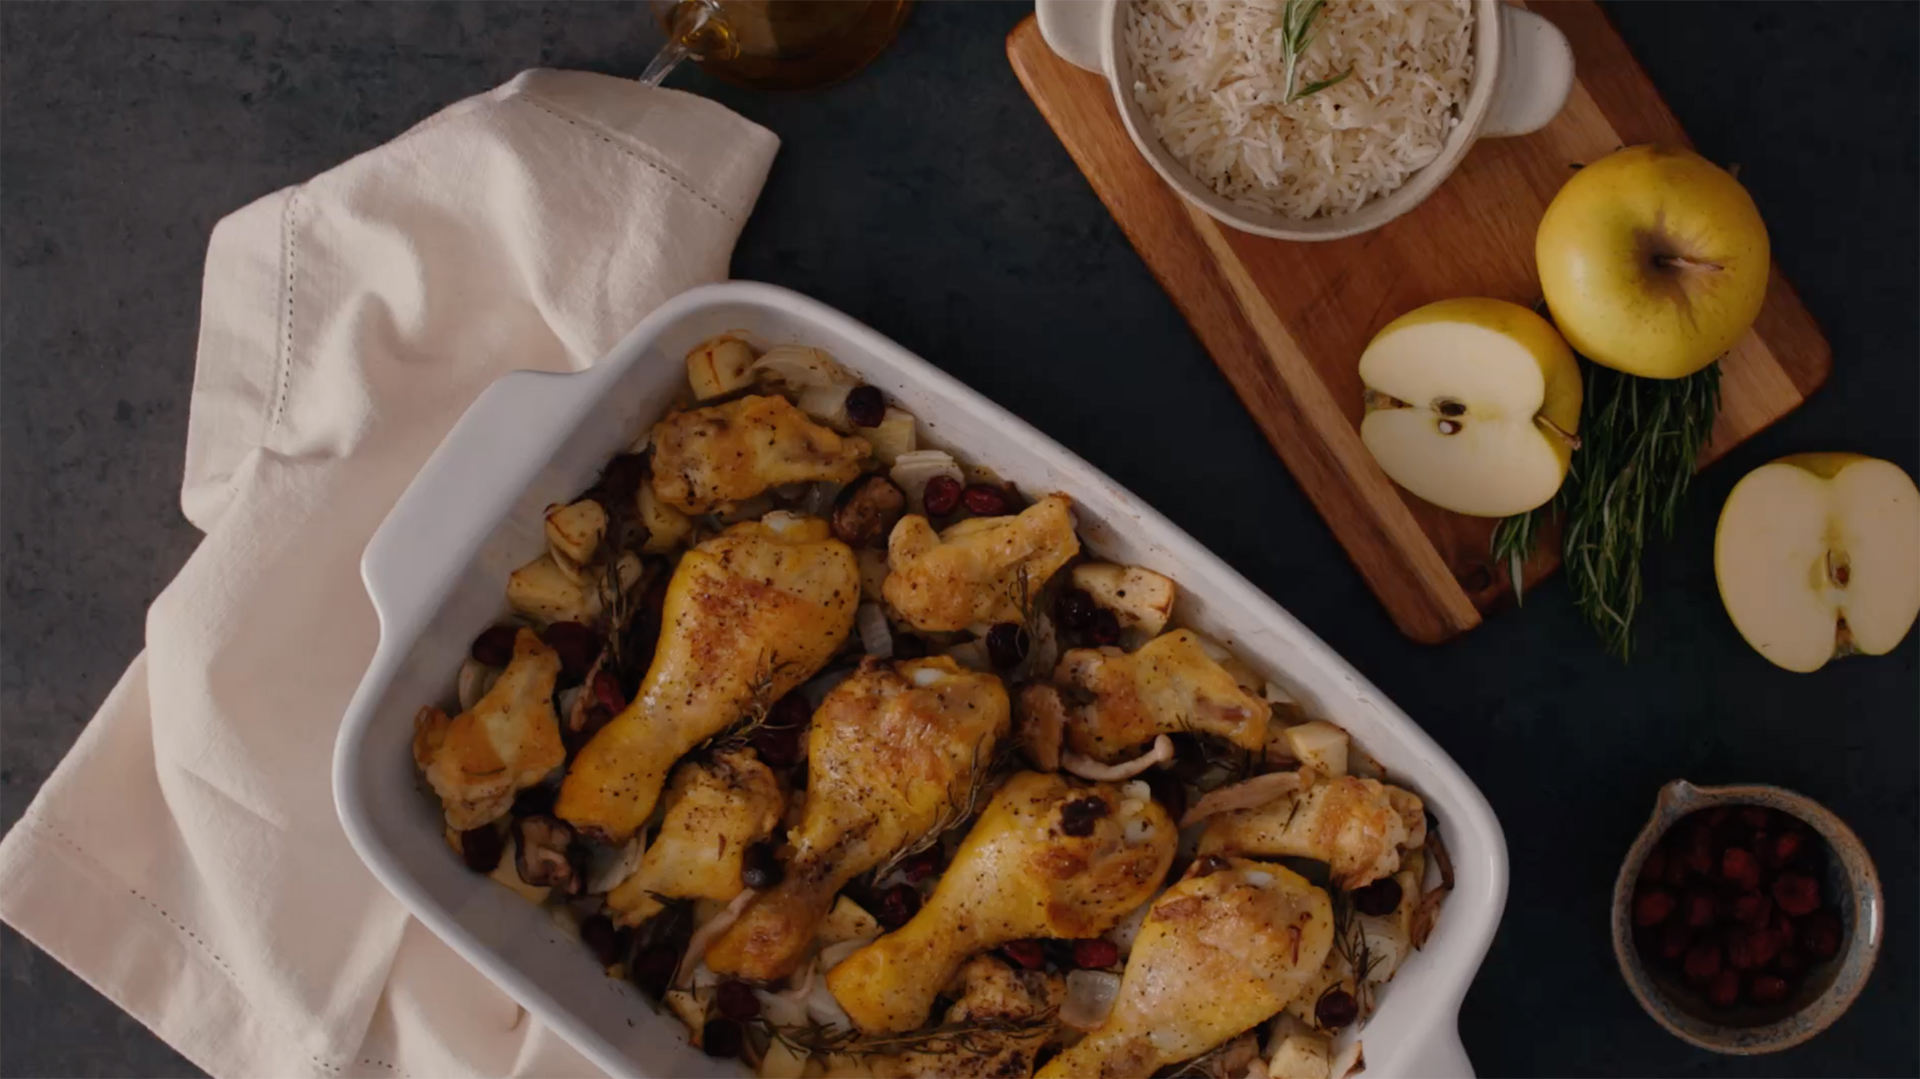 Roasted chicken with apple and white rice